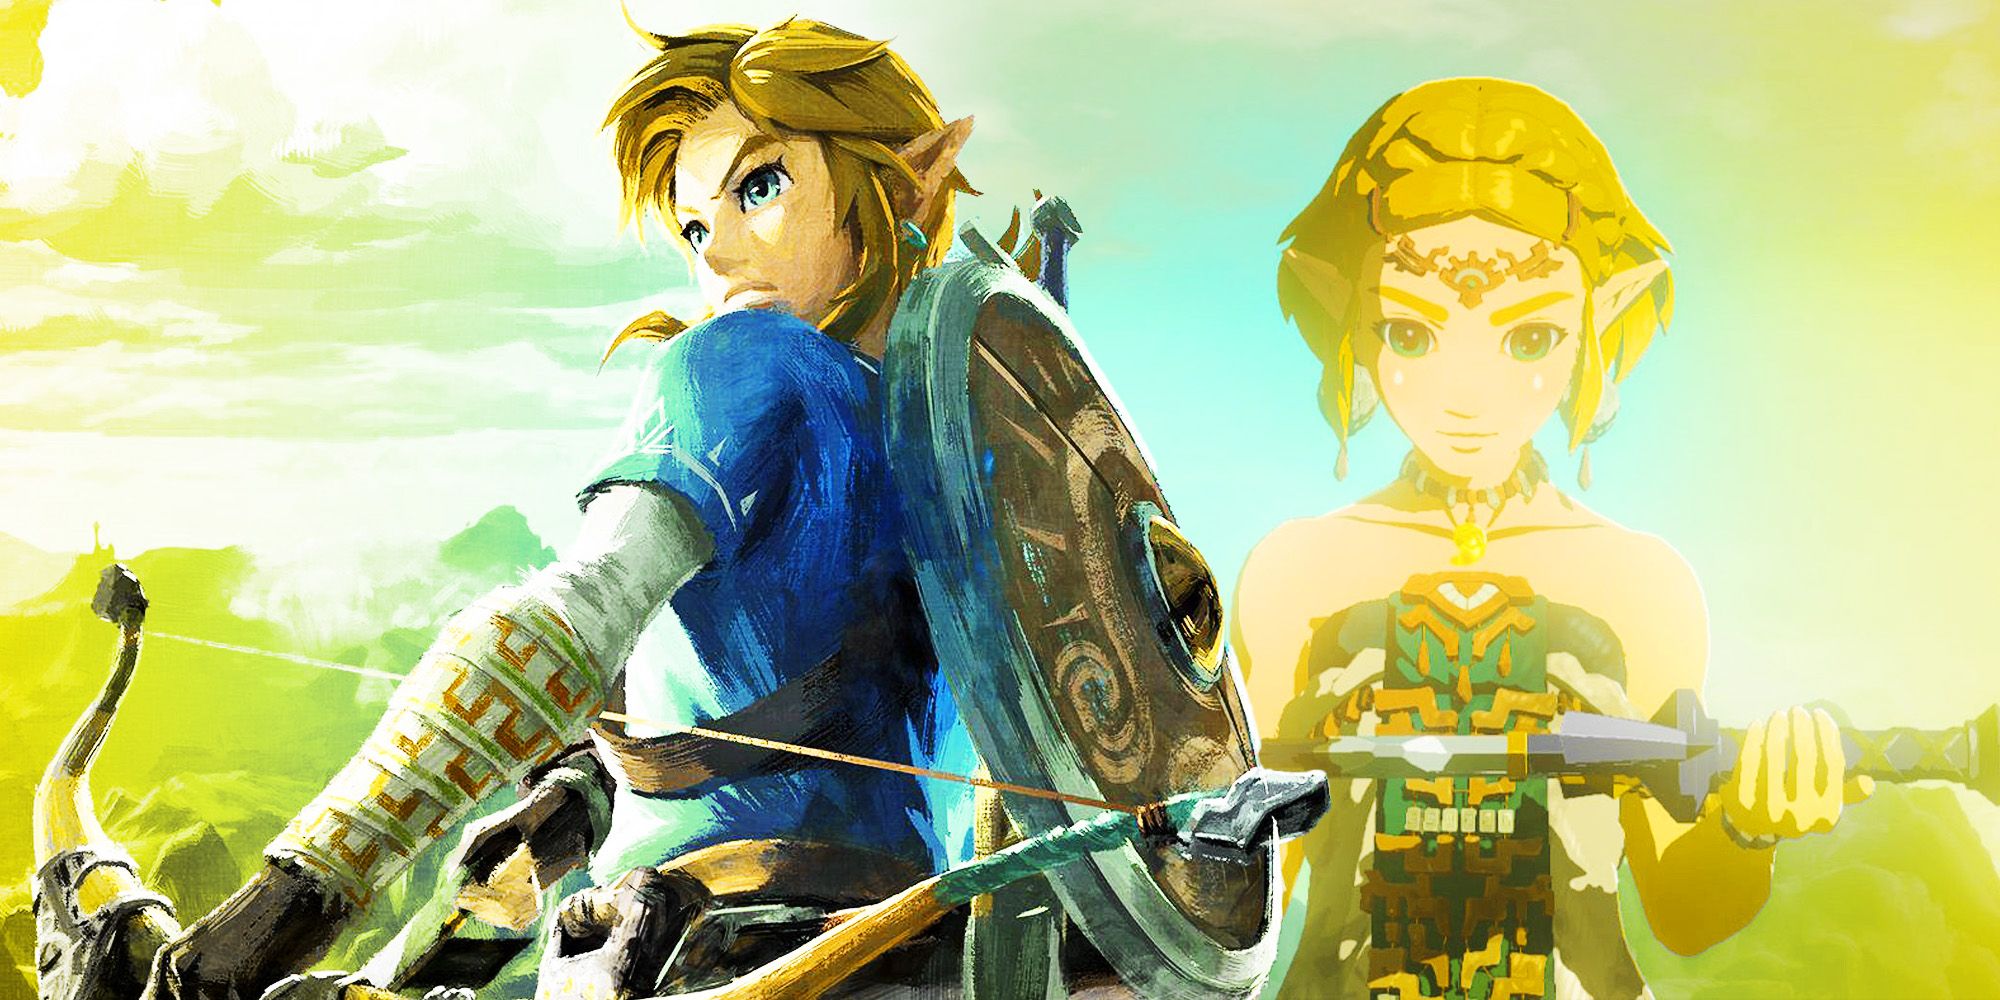 Legend Of Zelda's Live-Action Movie Is Even More Exciting Based On